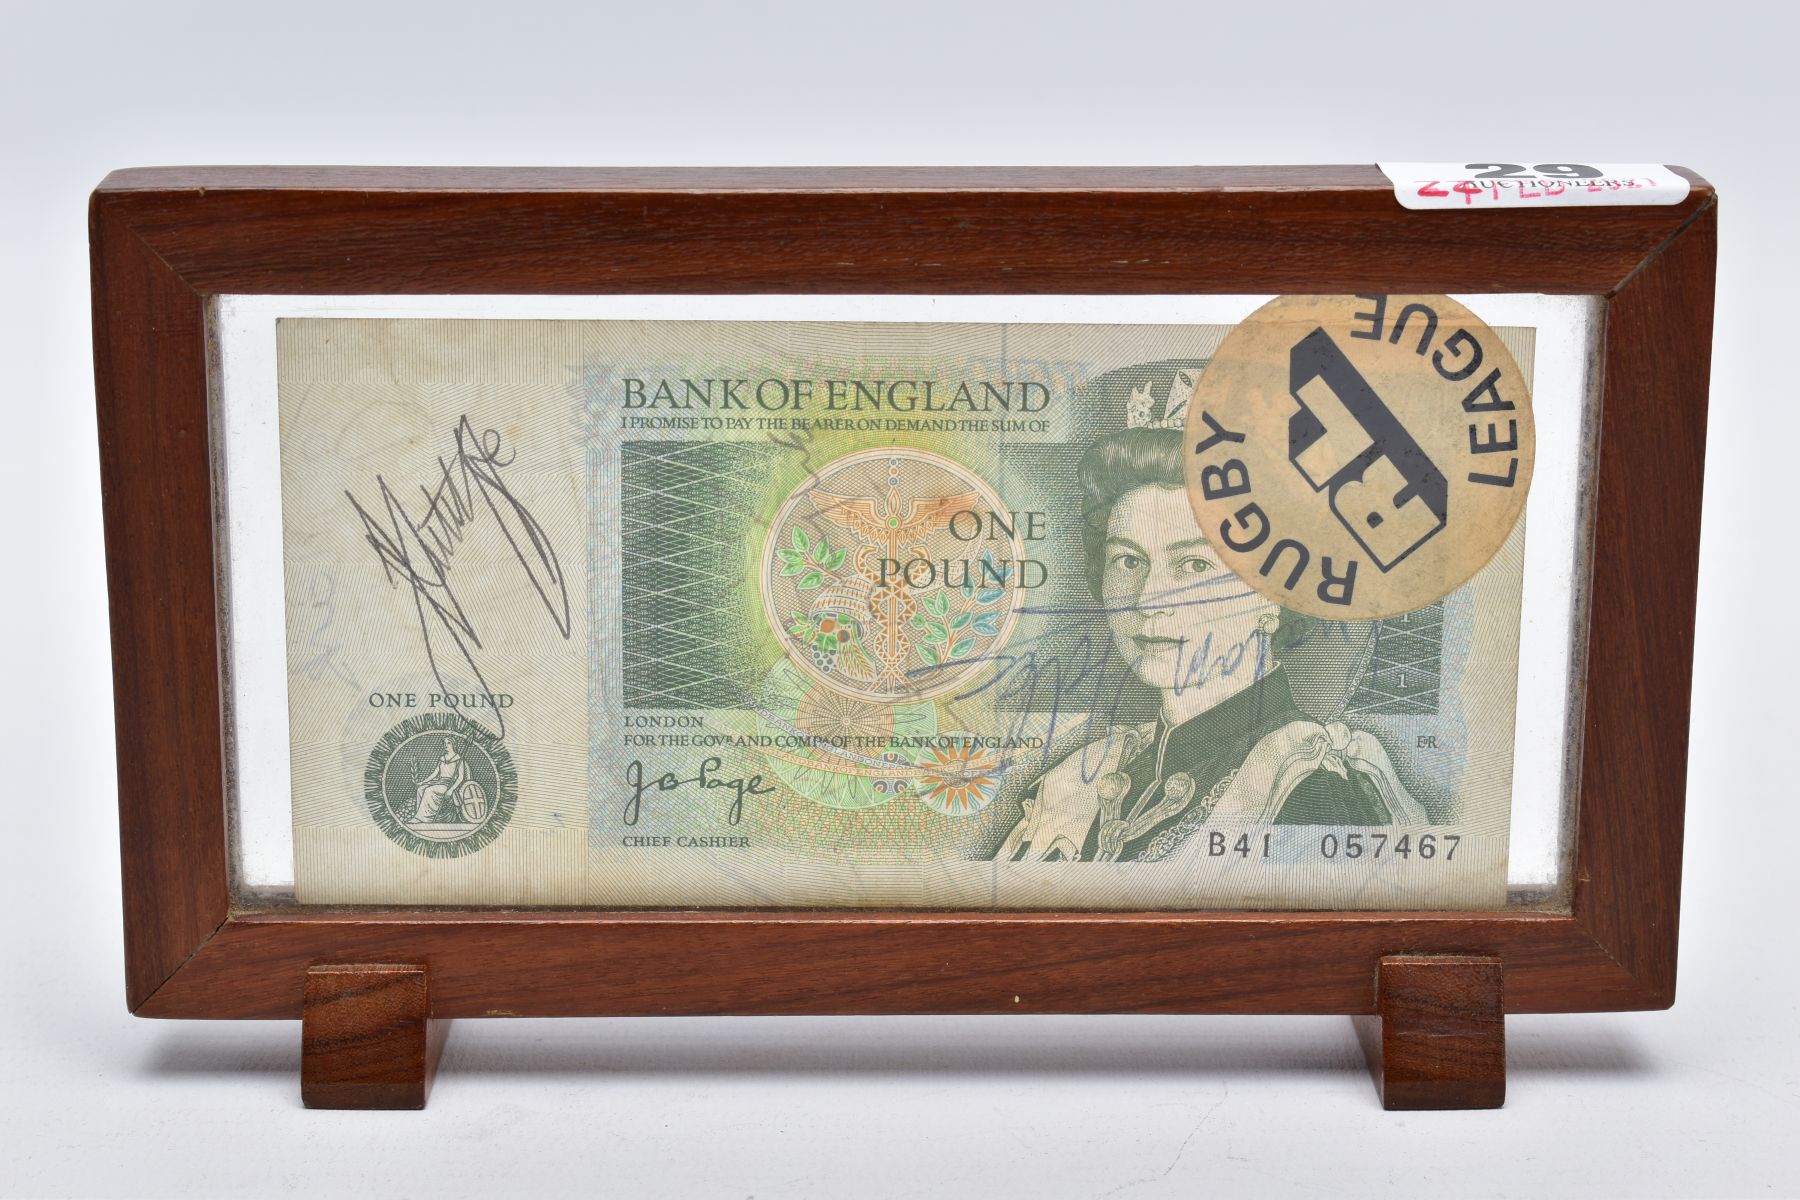 A FRAMED BANK OF ENGLAND 'ONE POUND NOTE', within a wooden frame, raised on two block feet, the note